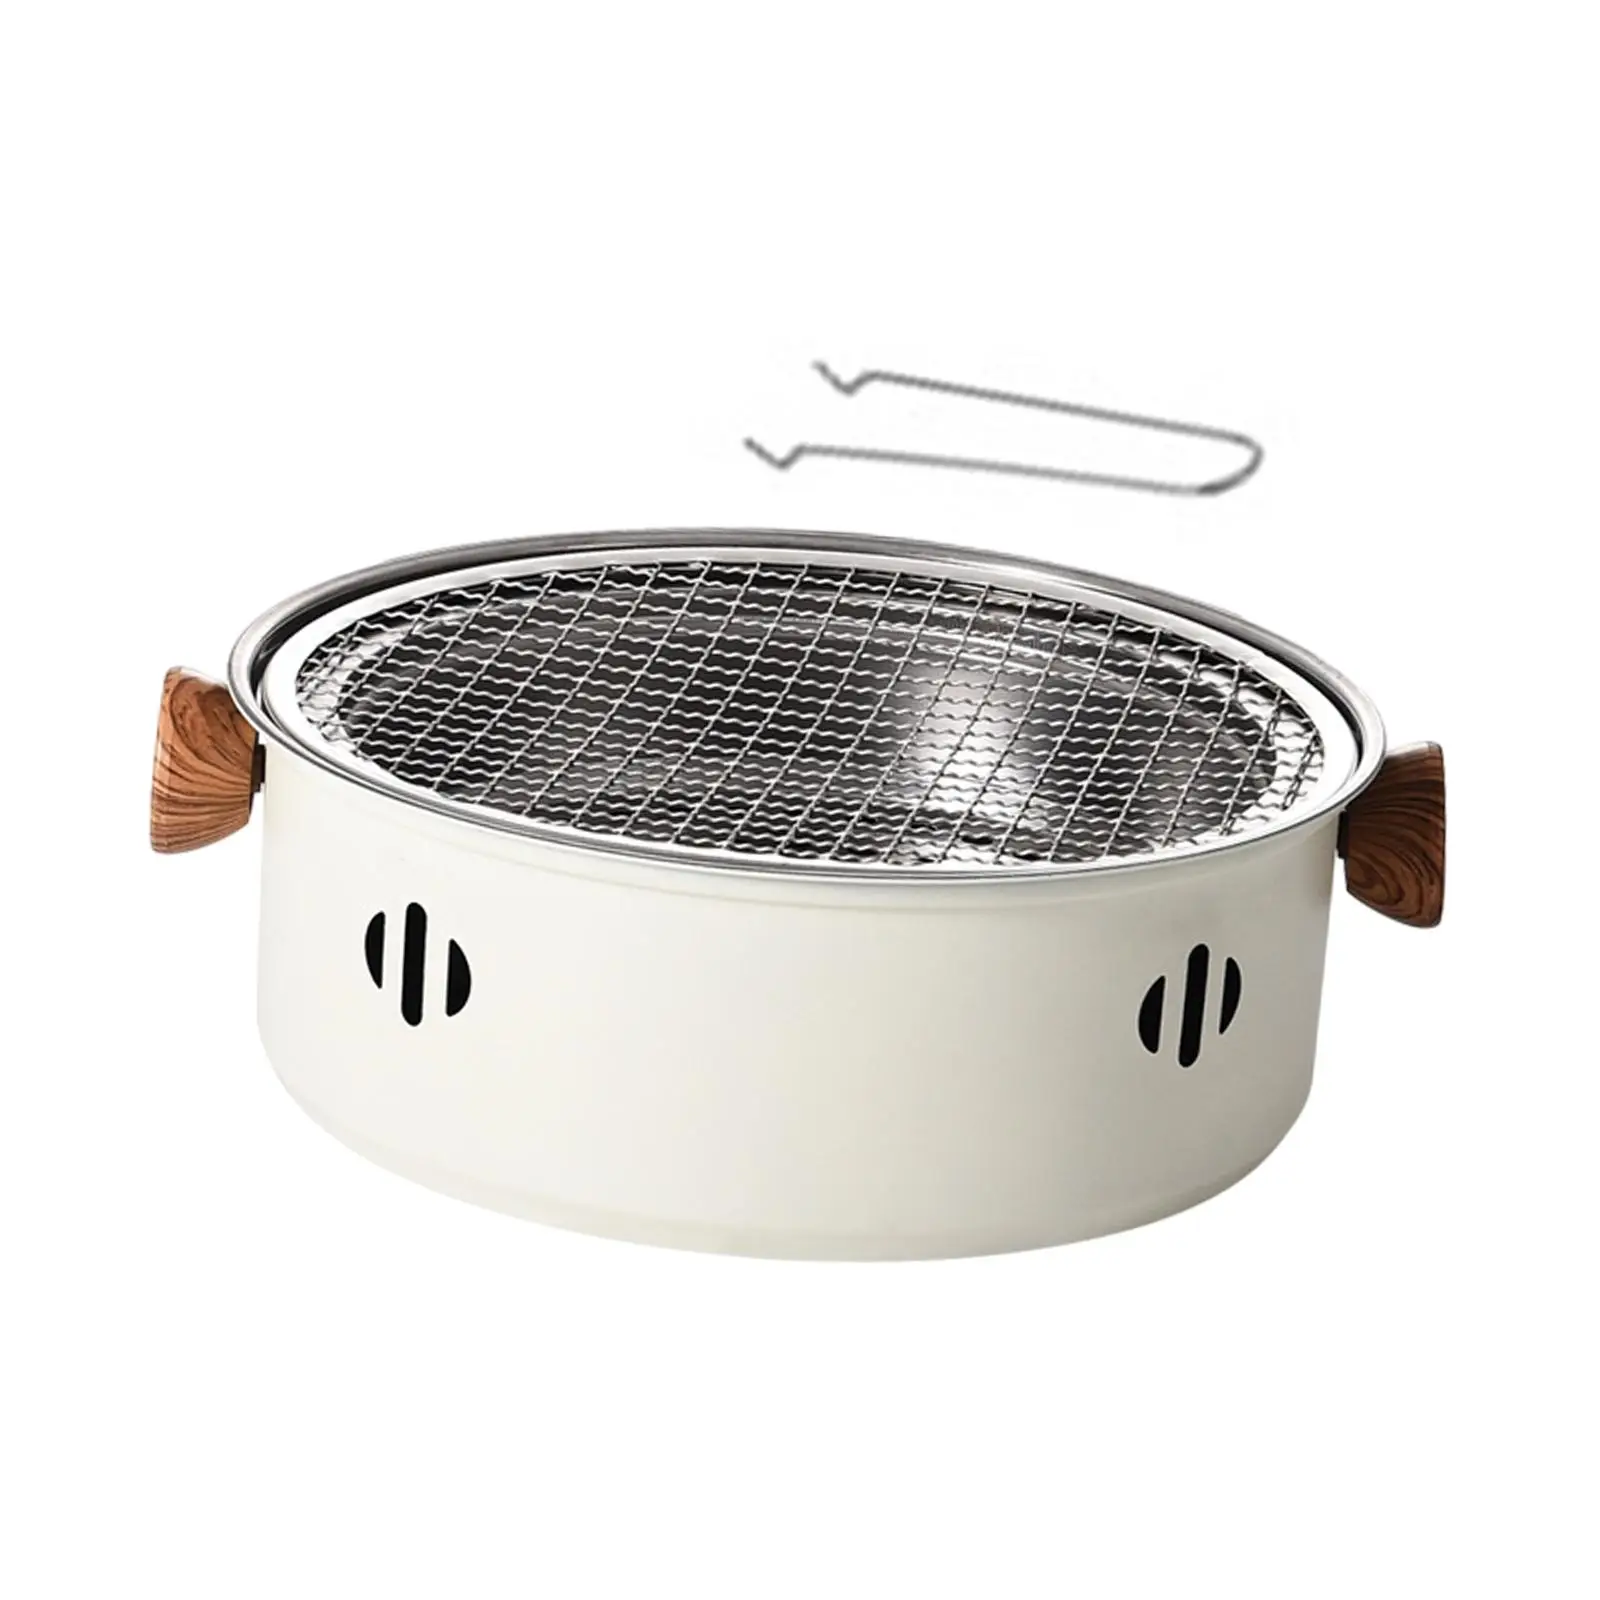 Charcoal Stove Portable Stainless Steel with Grill Grid Teapot Warmer Outdoor Grill Stove for Picnic Household Beach Cooking